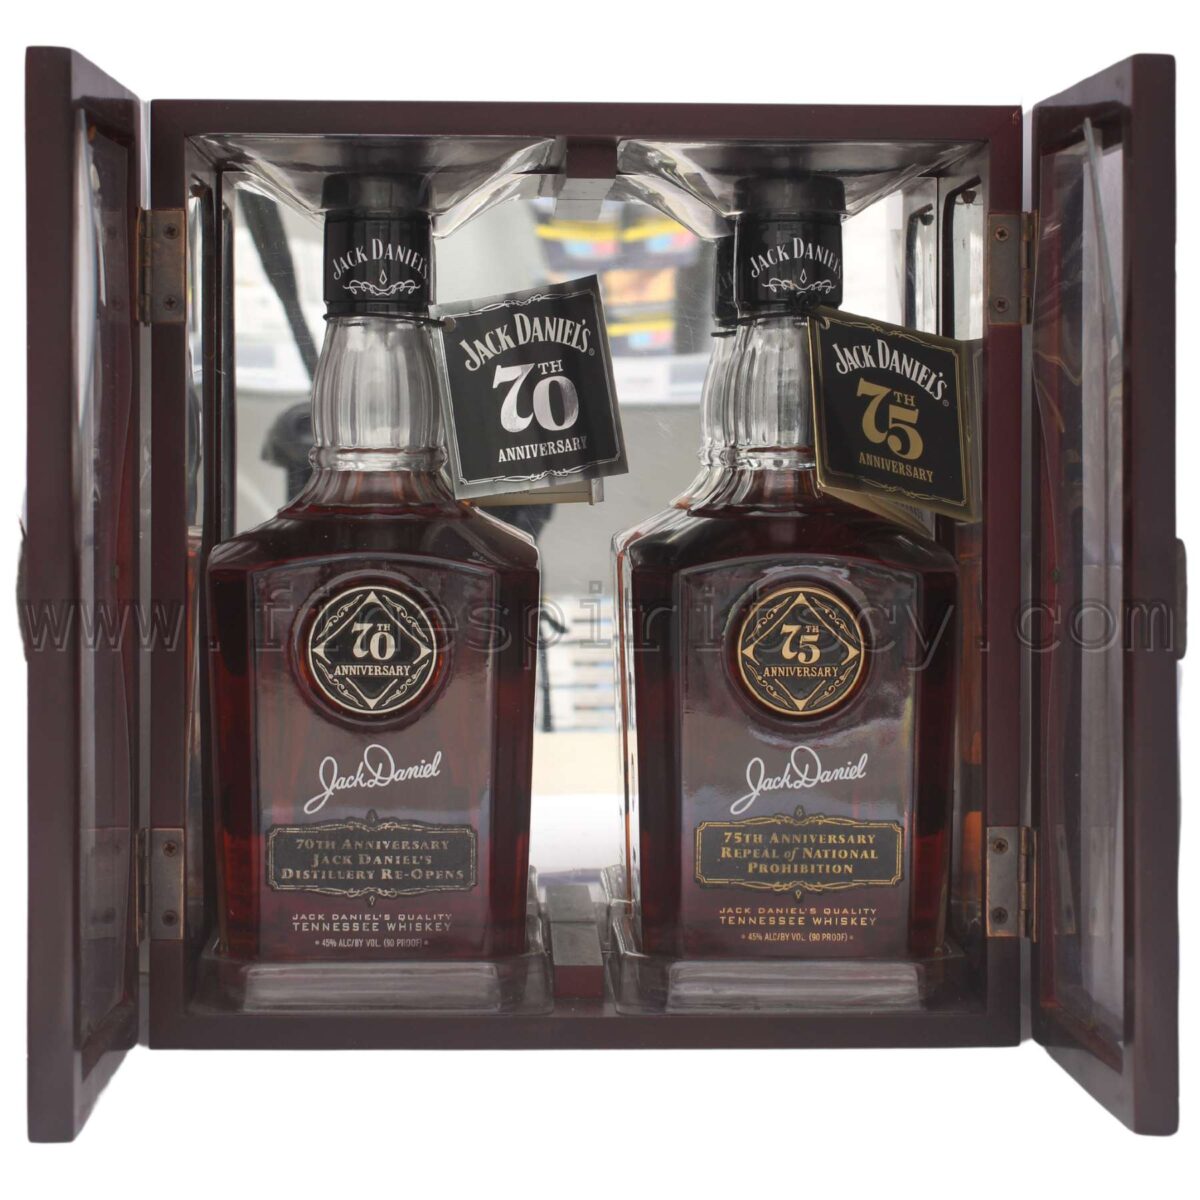 JD Prohibition Set 70th 75th anniversary 750ml 75cl 0.75l bottles price collectors